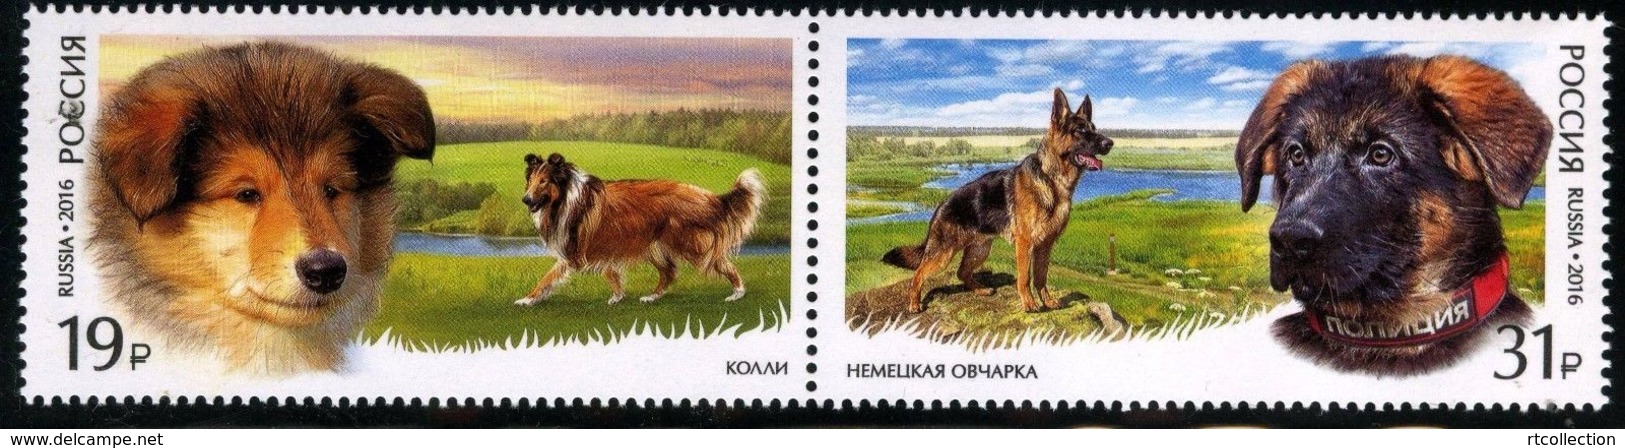 Russia 2016 Pair World Dog Show Moscow Dogs Animals Fauna Mammals German Scottish Shepherd Colli Breed Farm Stamps MNH - Dogs